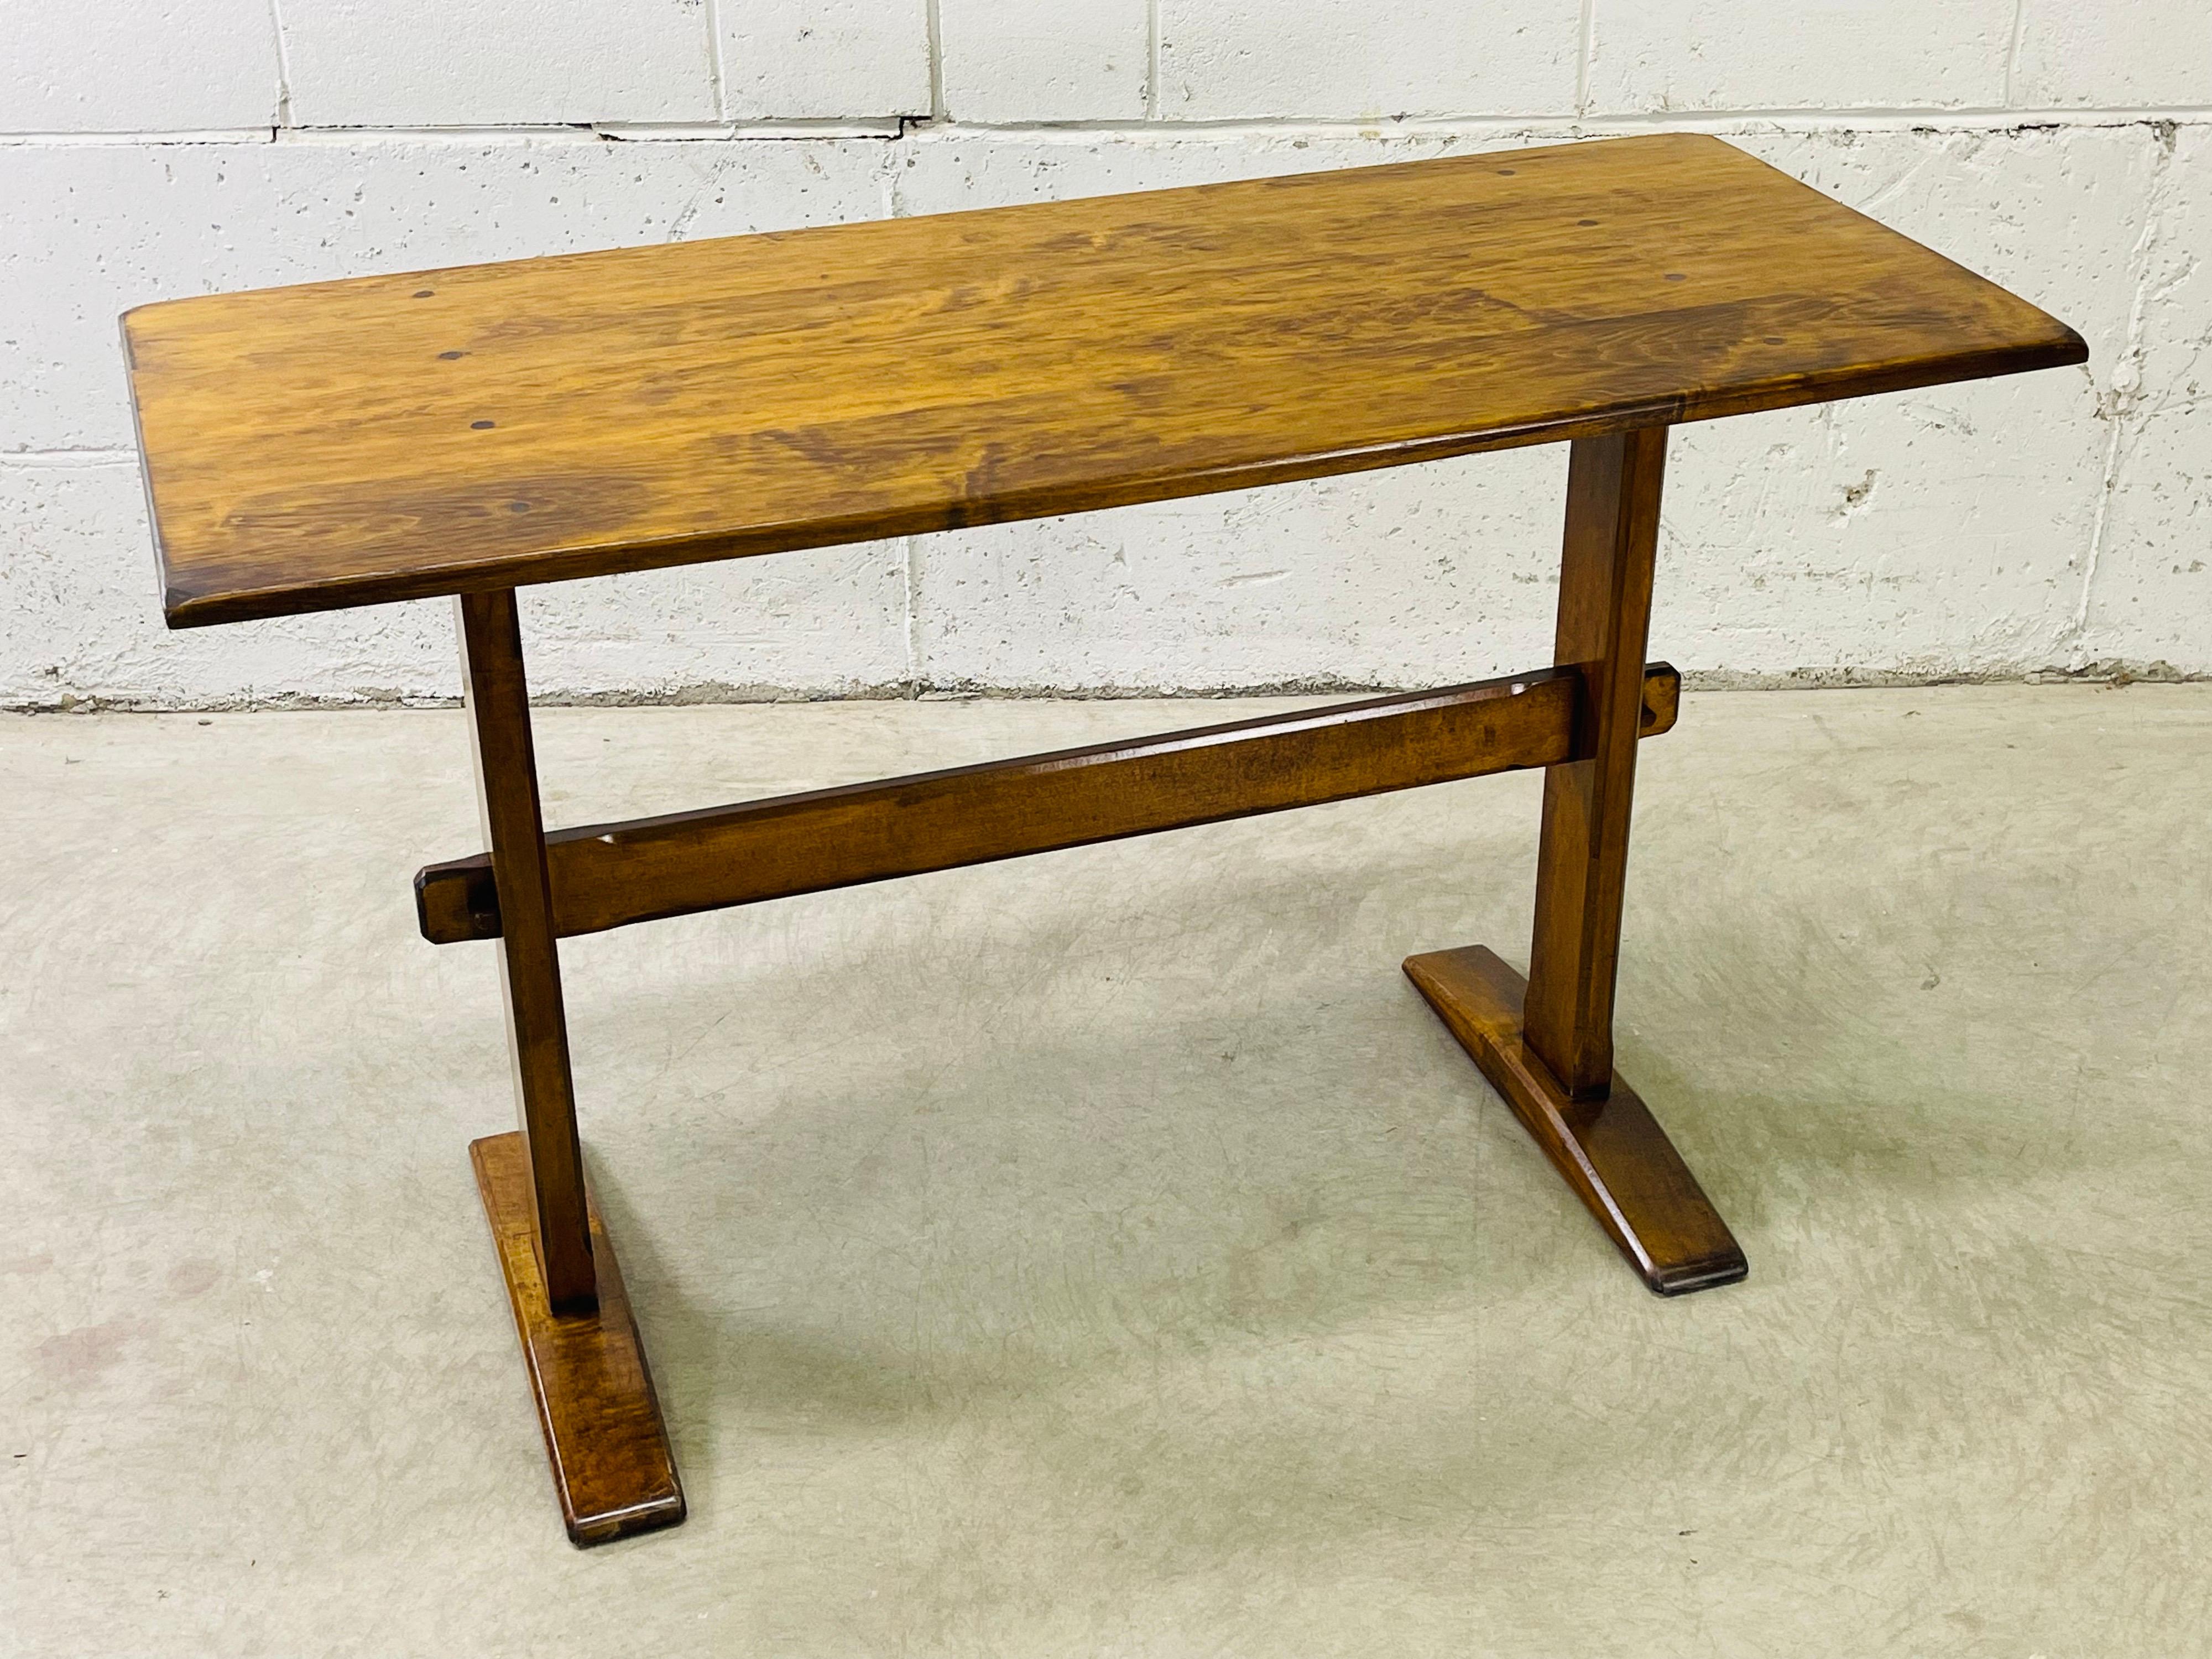 Vintage 1970s pine wood small rectangular trestle table. The table seats four people and has curved table edges. Nice pine wood grain and color. Newly refinished condition. No marks.